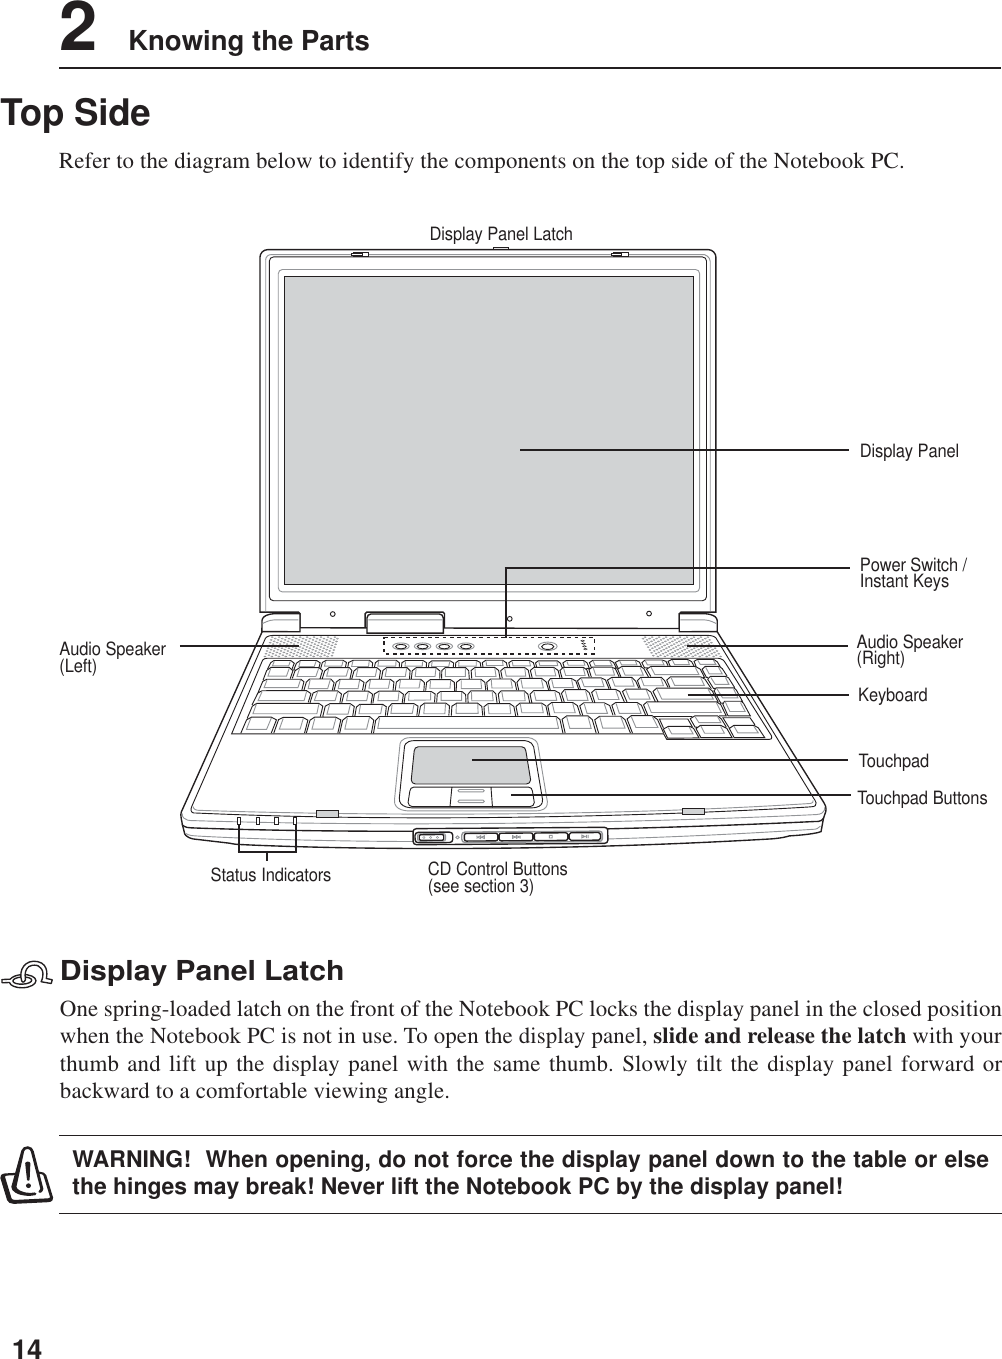 142    Knowing the PartsTop SideRefer to the diagram below to identify the components on the top side of the Notebook PC.Display Panel LatchOne spring-loaded latch on the front of the Notebook PC locks the display panel in the closed positionwhen the Notebook PC is not in use. To open the display panel, slide and release the latch with yourthumb and lift up the display panel with the same thumb. Slowly tilt the display panel forward orbackward to a comfortable viewing angle.WARNING!  When opening, do not force the display panel down to the table or elsethe hinges may break! Never lift the Notebook PC by the display panel!Display PanelTouchpad ButtonsKeyboardTouchpadPower Switch /Instant KeysStatus Indicators CD Control Buttons(see section 3)Display Panel LatchAudio Speaker(Right)Audio Speaker(Left)